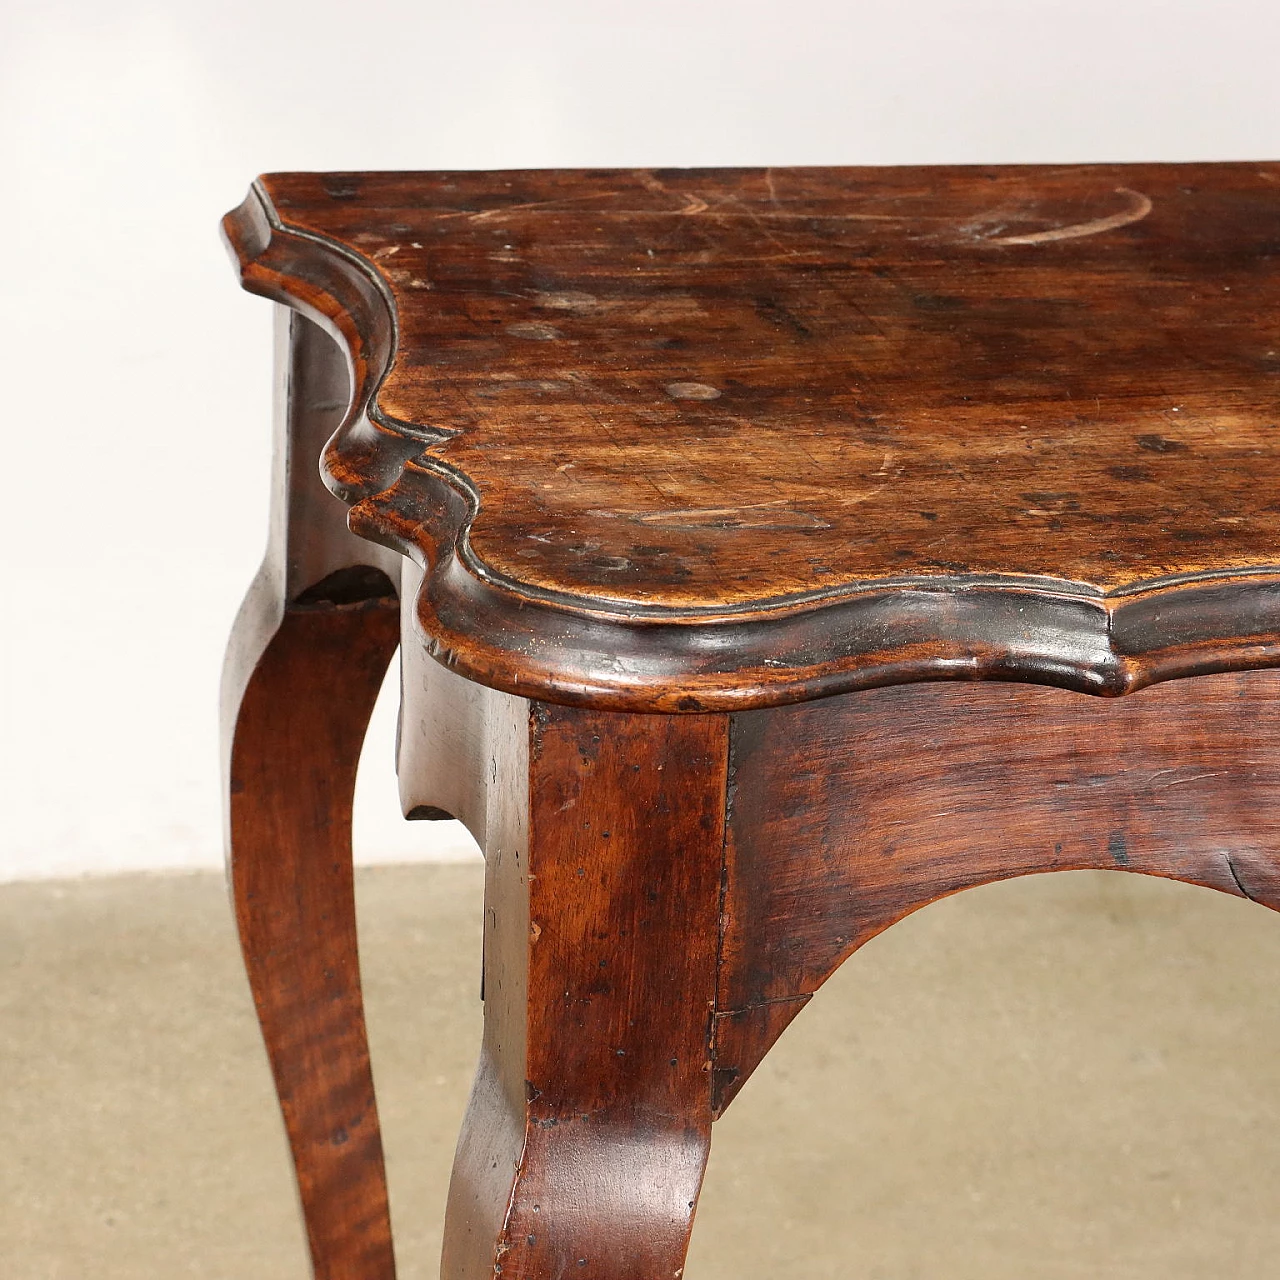 Console in cherry wood with walnut top and wavy legs, 18th century 3